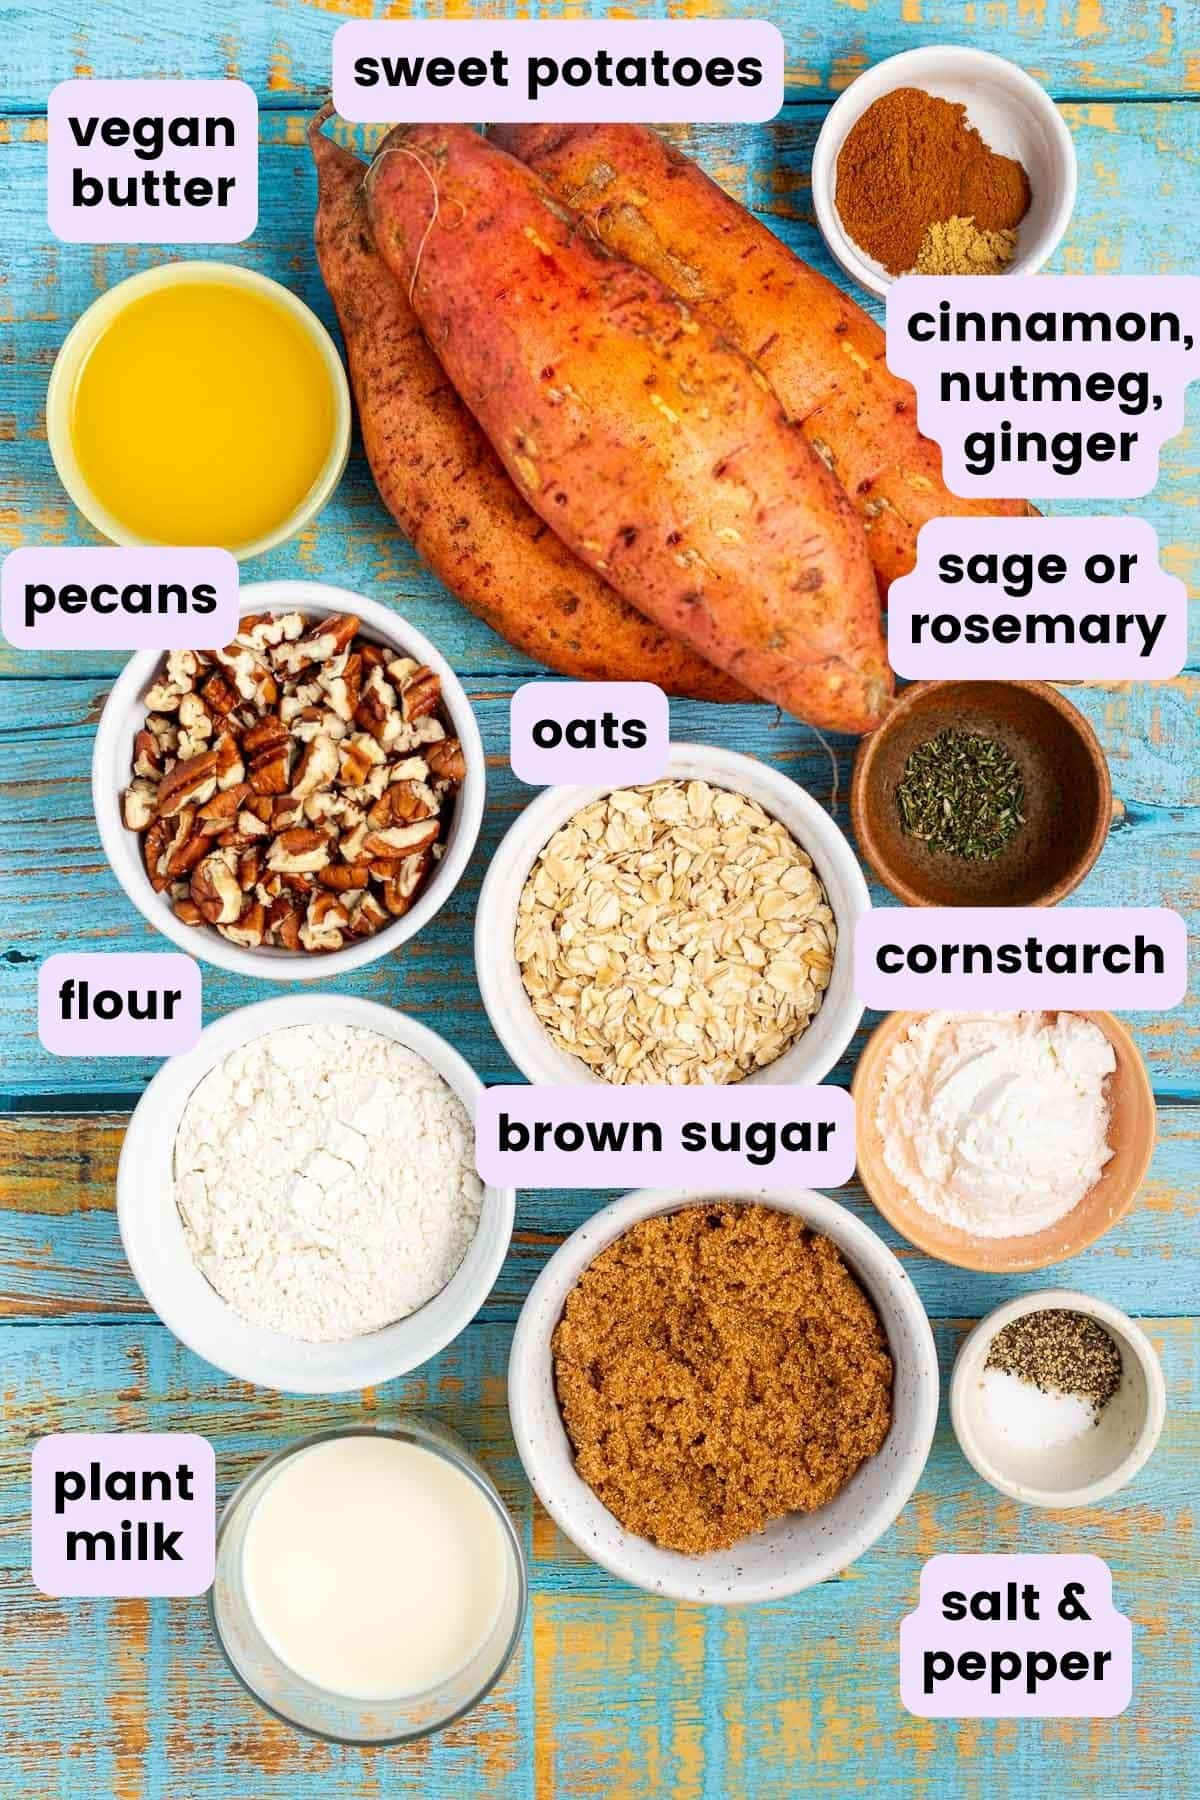 ingredients for this recipe: sweet potatoes, spices, melted vegan butter, pecans, oats, flour, cornstarch, plant milk, salt and pepper, brown sugar. 